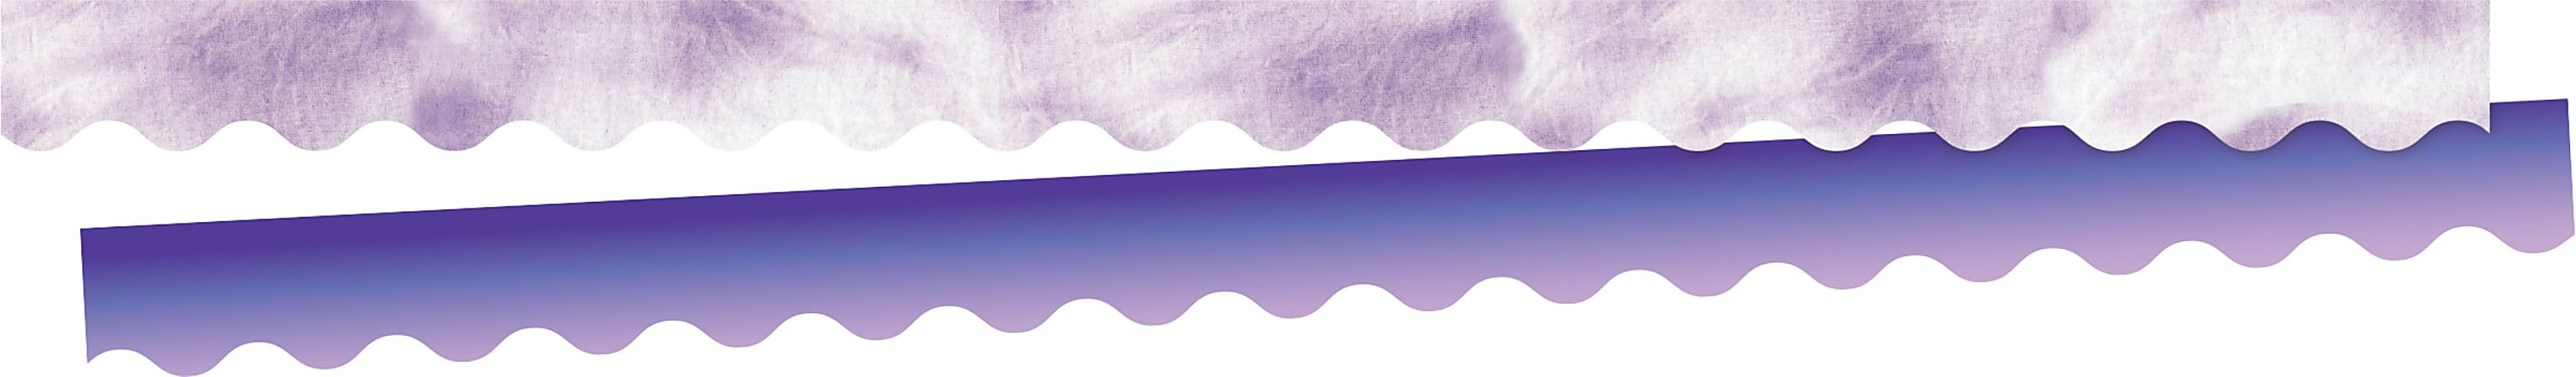 Barker Creek Double-Sided Scalloped Edge Borders, 2-1/4" x 36, Purple Tie-Dye And Ombré, Pack Of 13 Borders